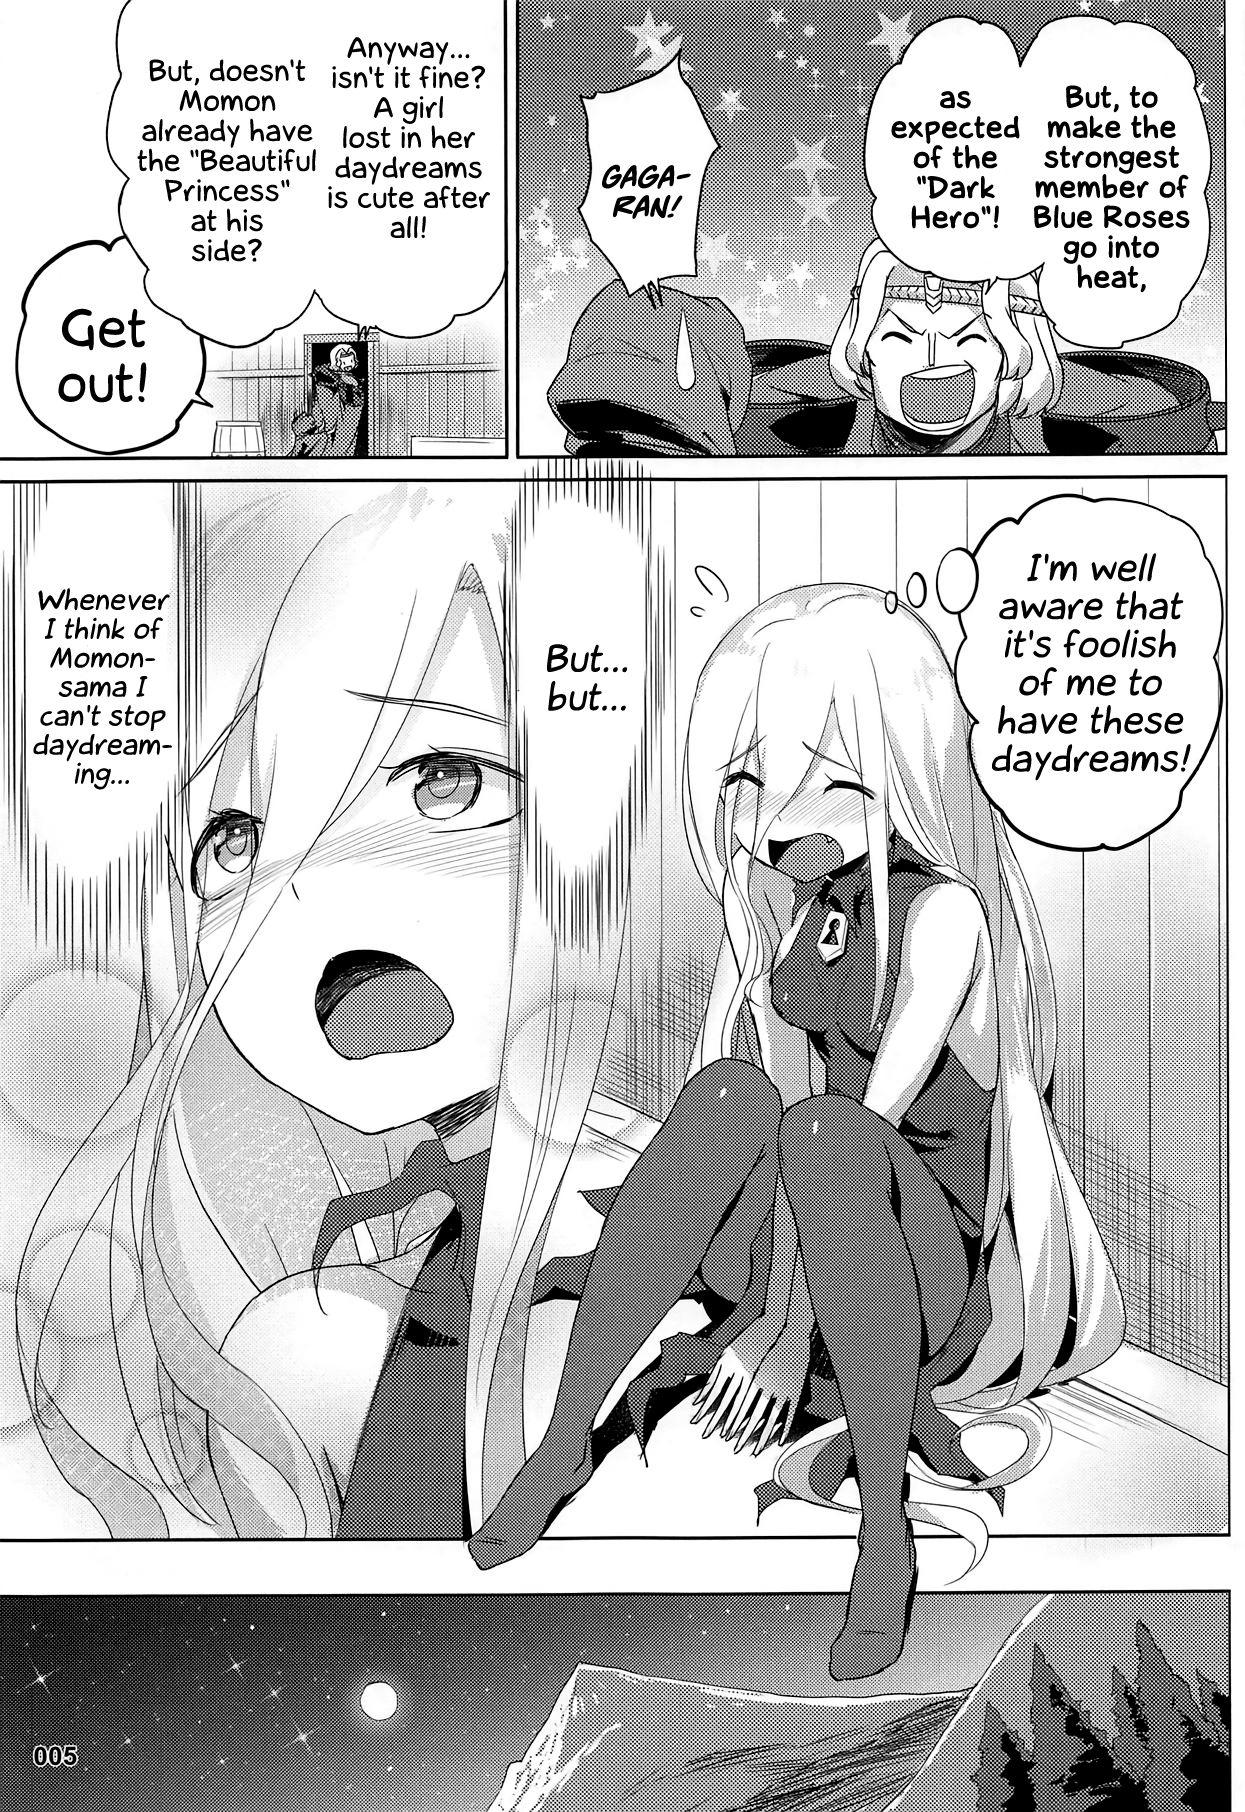 Beautiful Evileye no Mousou Sex | Evileye's Daydream Sex - Overlord Relax - Page 6